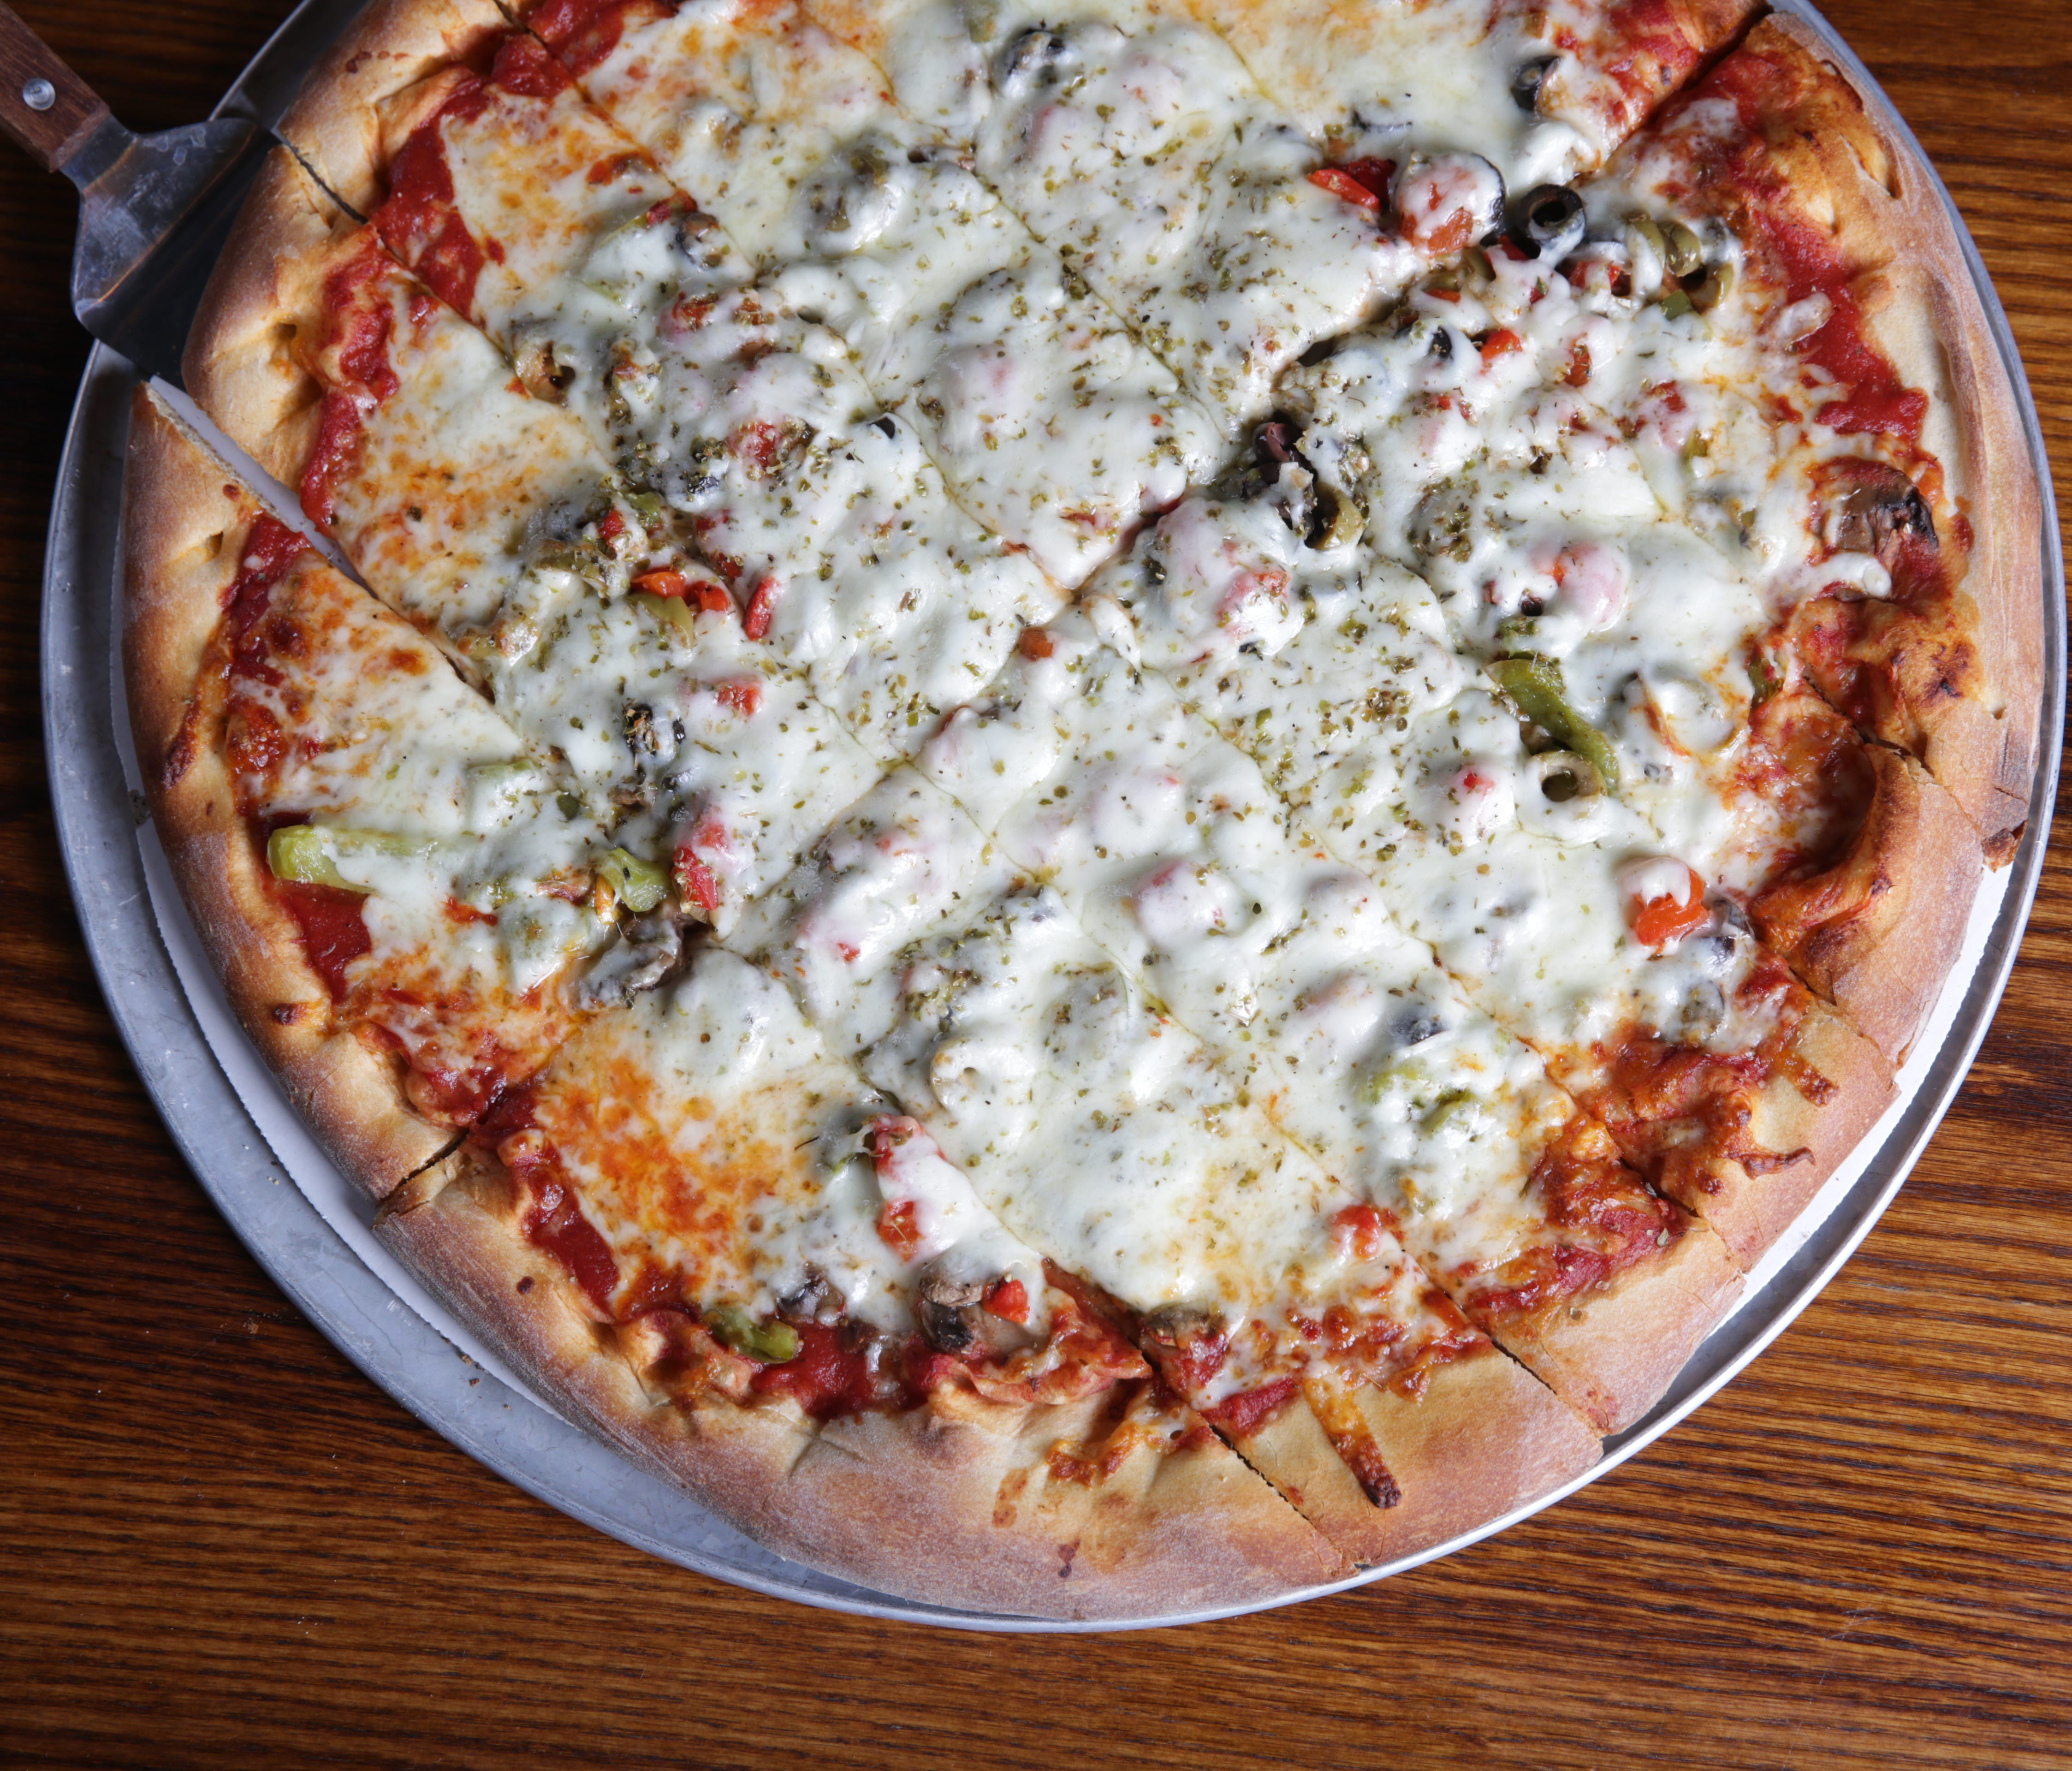 In line with Quad Cities tradition, Roots pizza dough contains a malt-heavy 